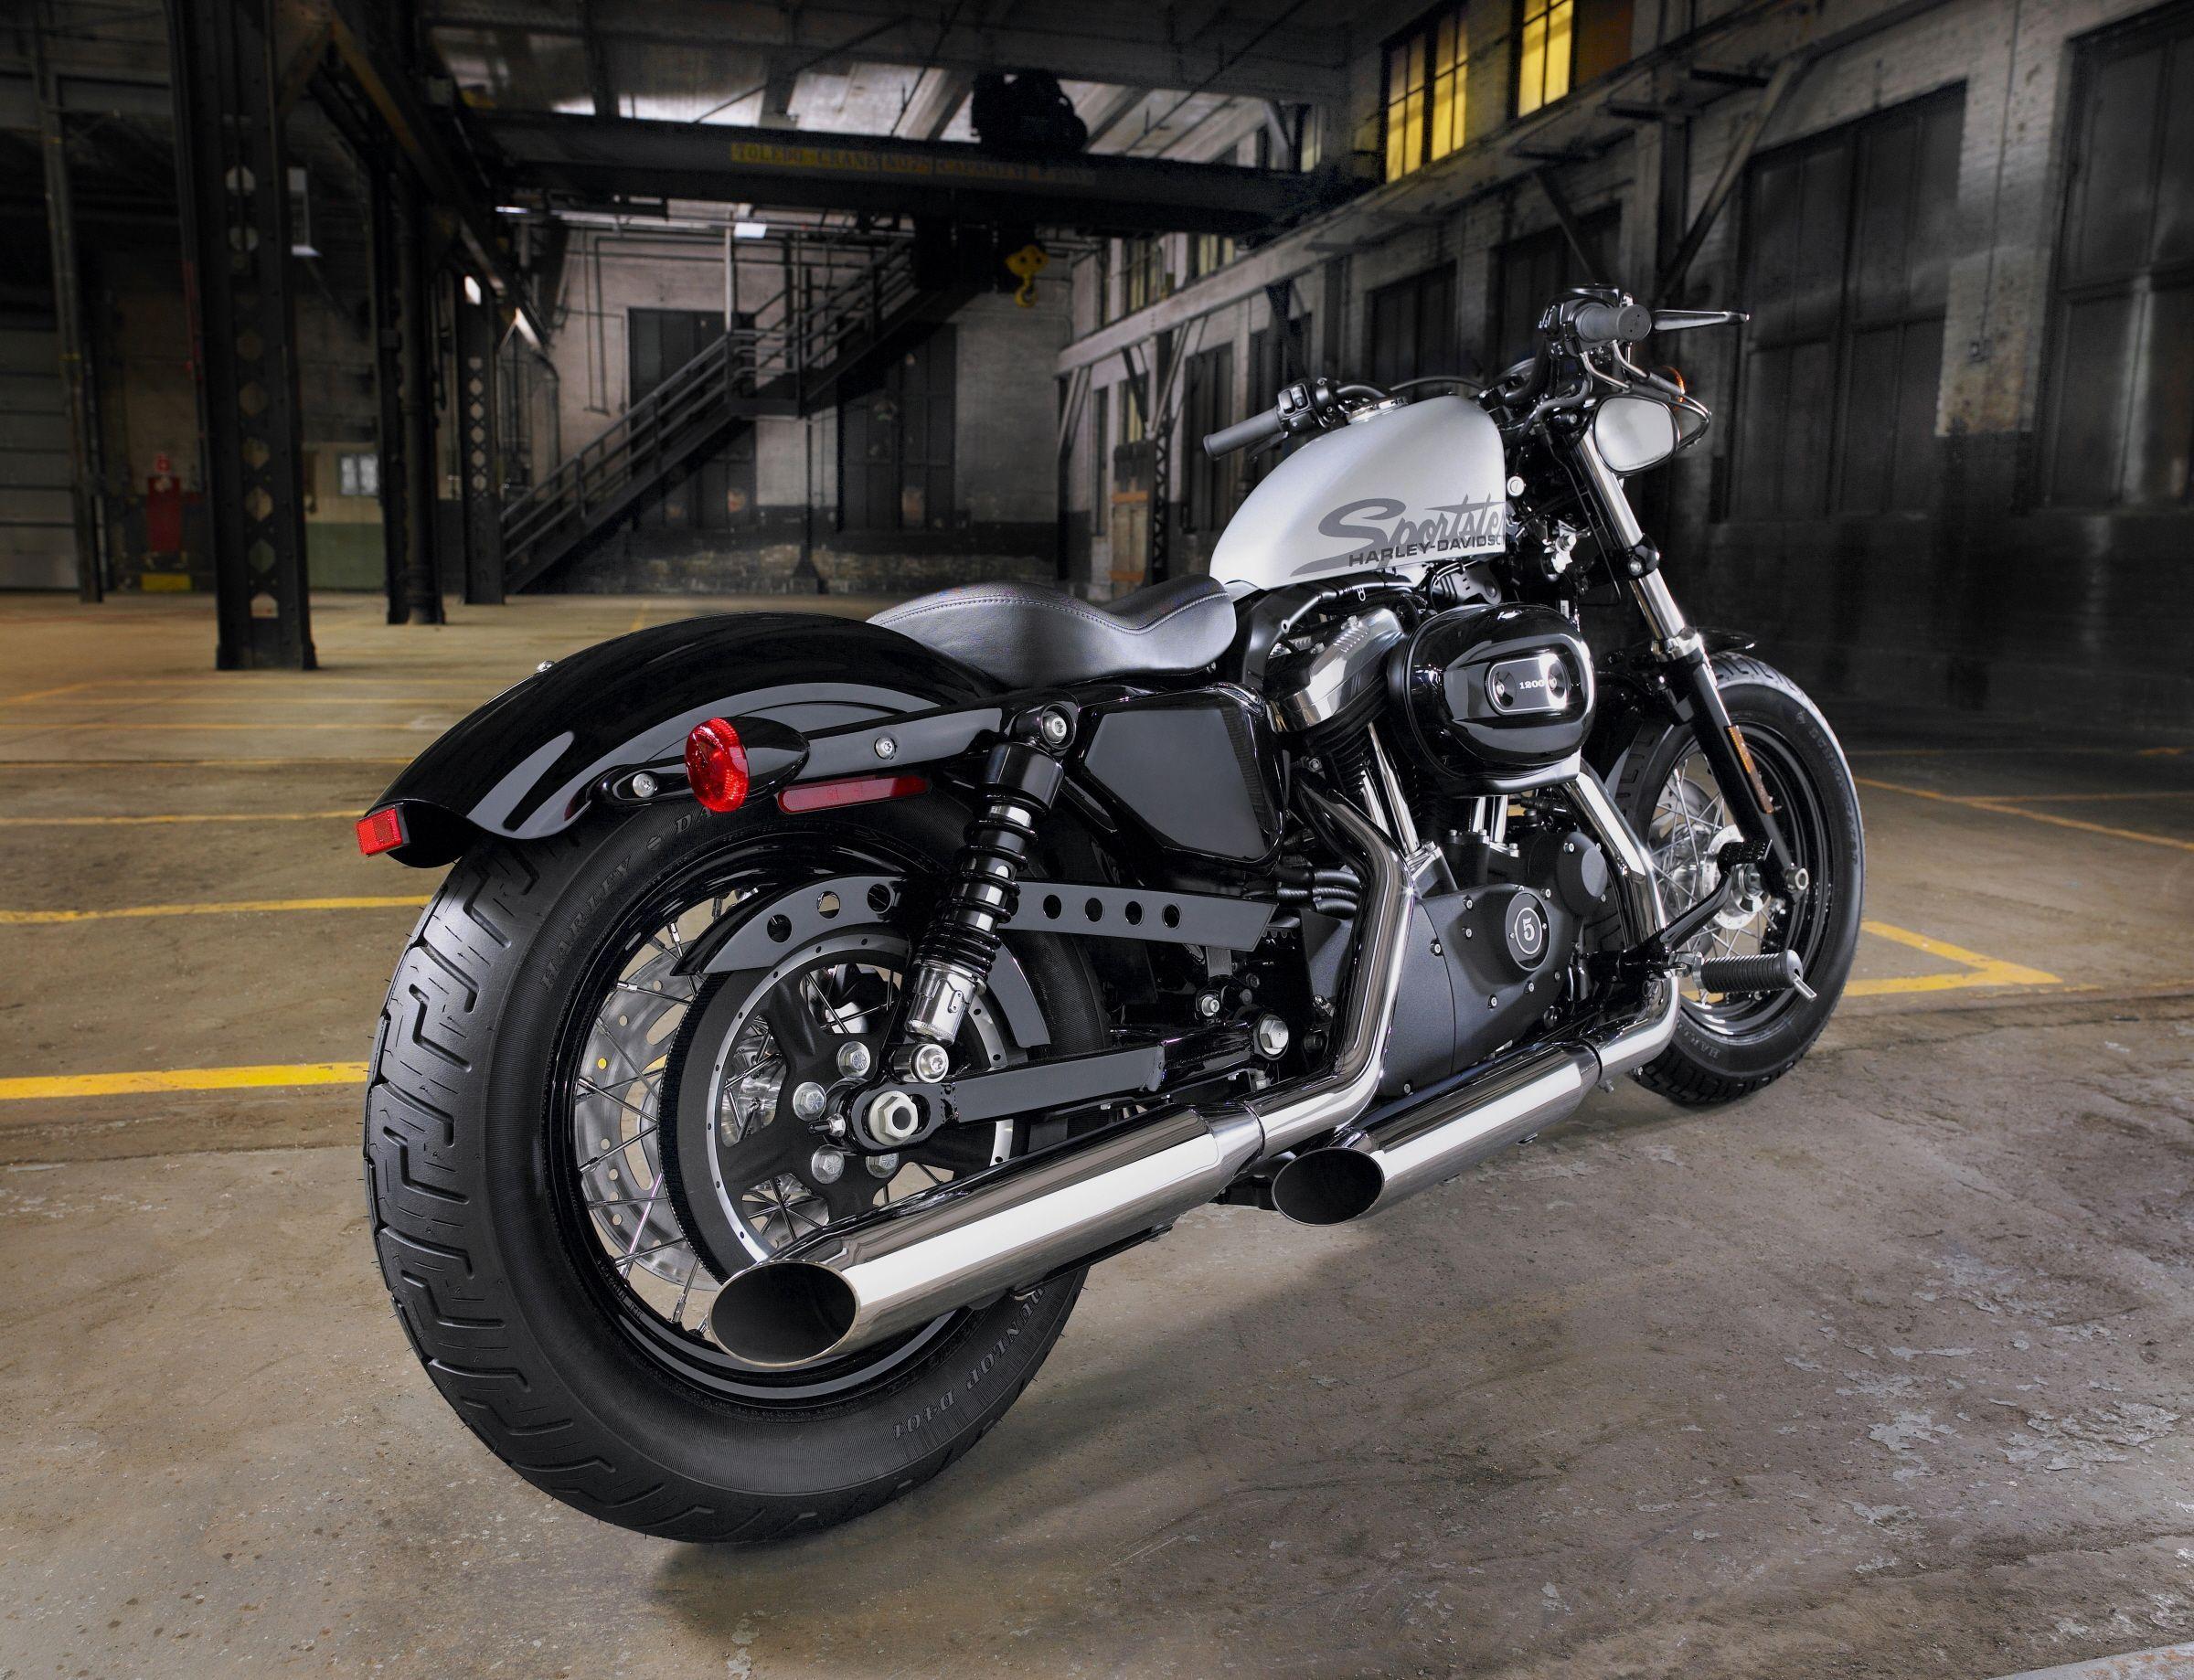 The XL Forty Eight Is Introduced, Recalling The Raw, Custom